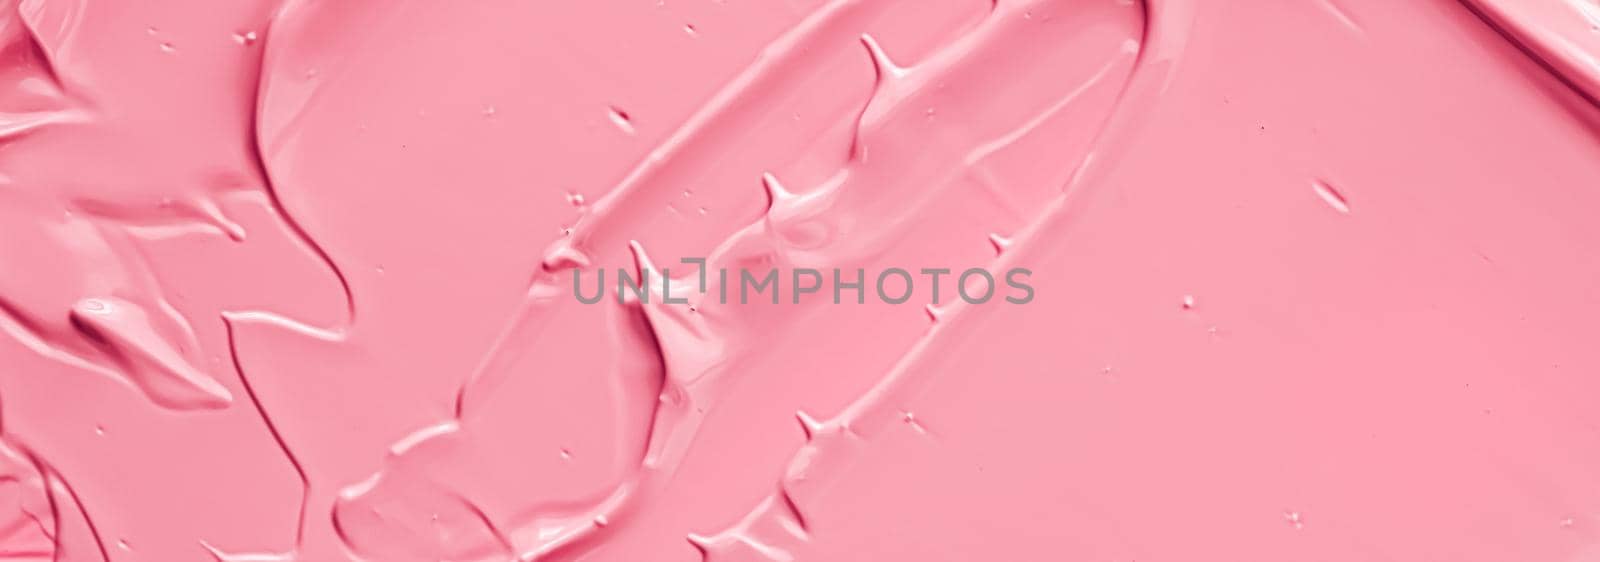 Pink lipstick or lip gloss texture as cosmetic background, makeup and beauty cosmetics product for luxury brand, holiday flatlay backdrop or abstract wall art and paint strokes by Anneleven